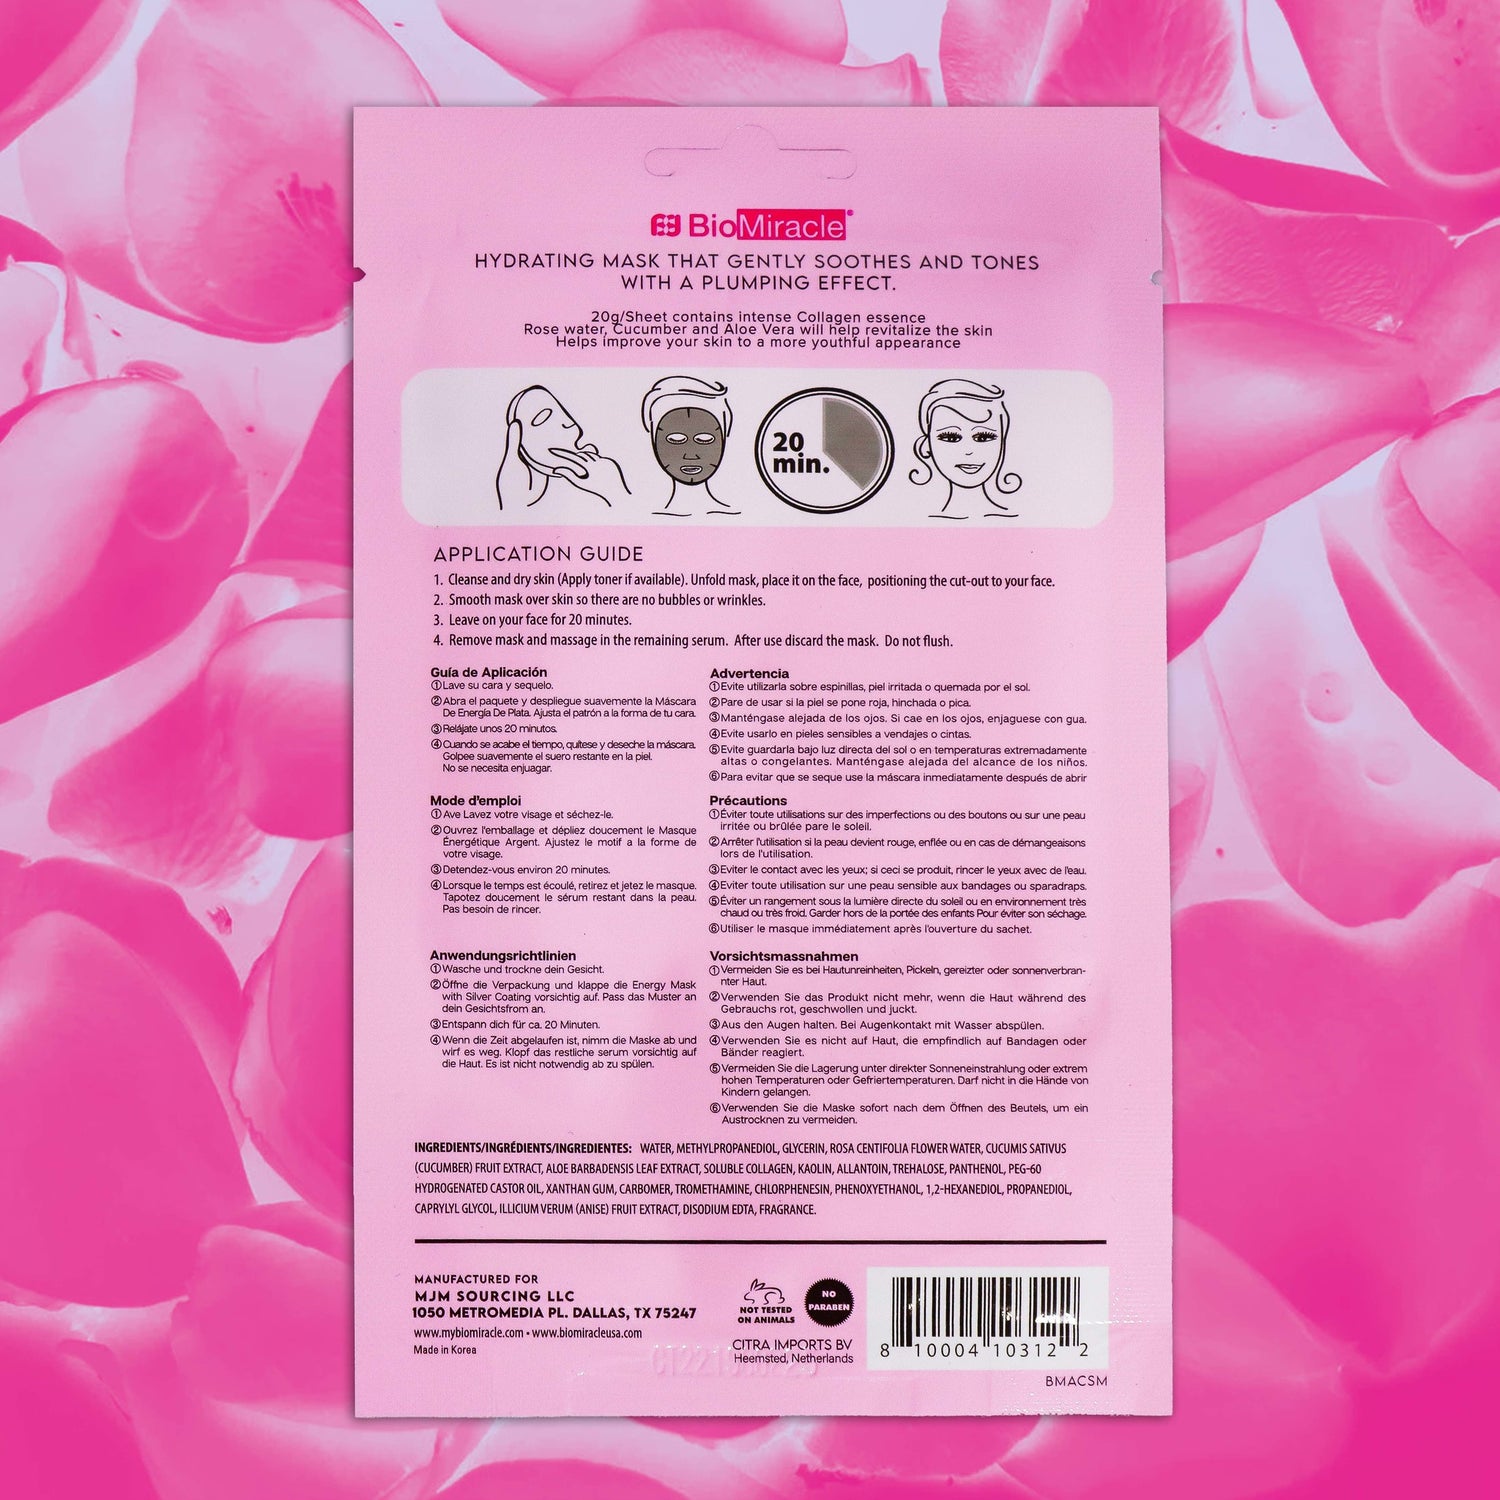 Moisturizing Collagen Sheet Mask Infused with Pink Clay, Rose Water, Cucumber and Aloe Vera 10 Pack